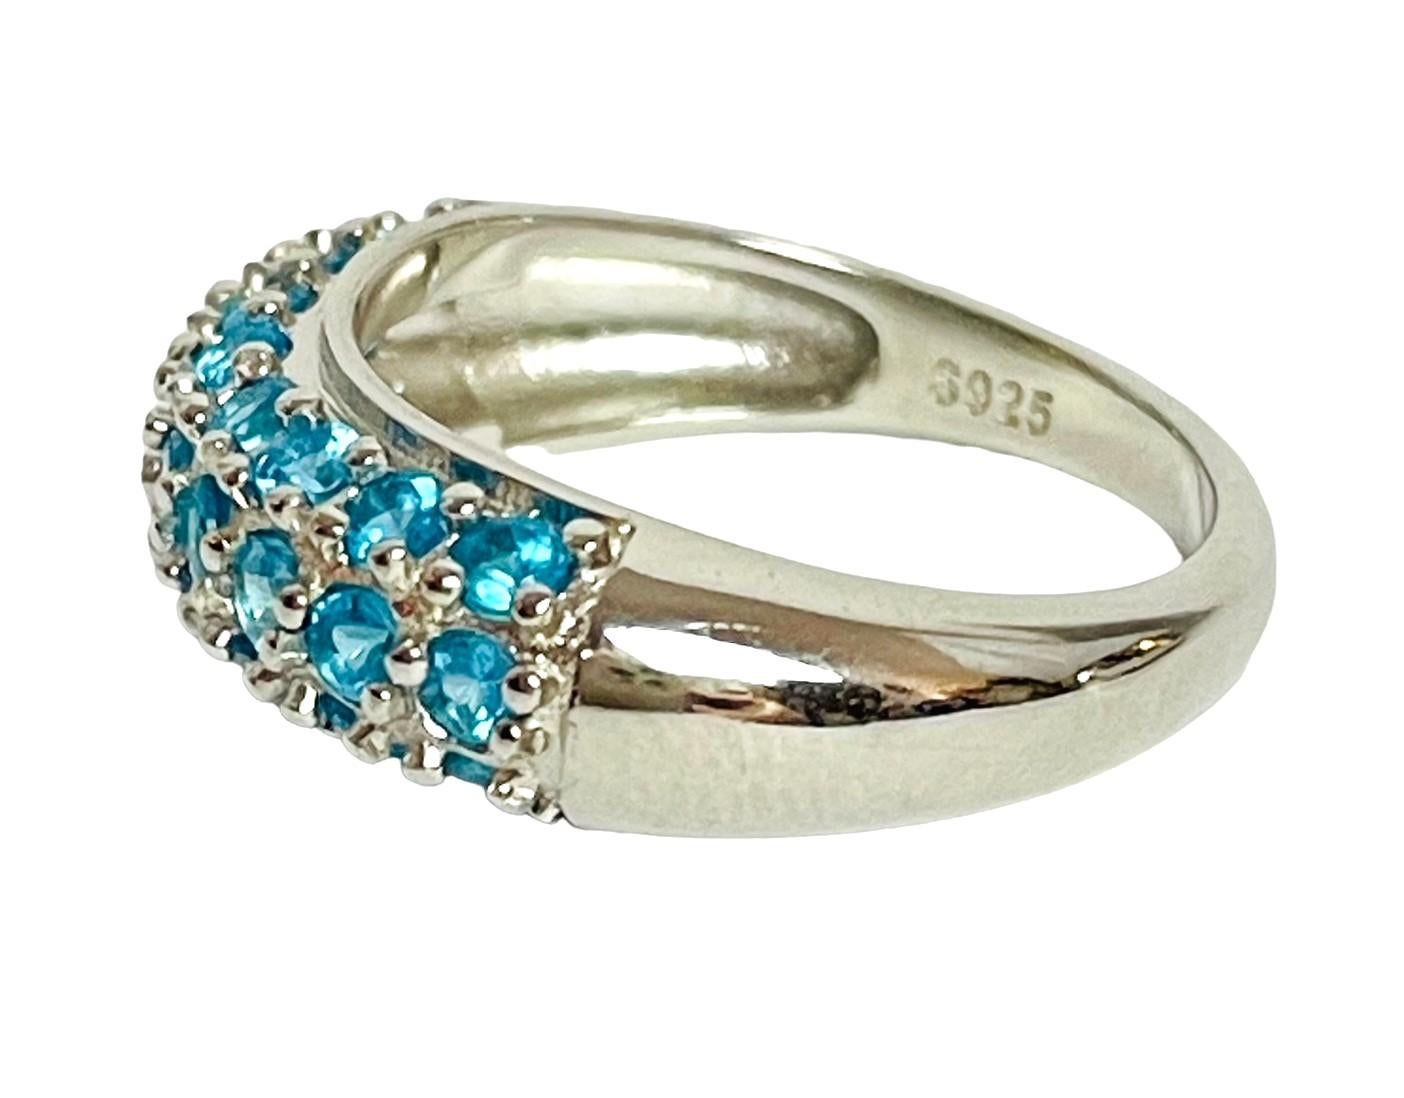 Art Deco New Unheated Paraiba Blue Apatite 14K White Gold Plate 925 Sterling Ring 6.75